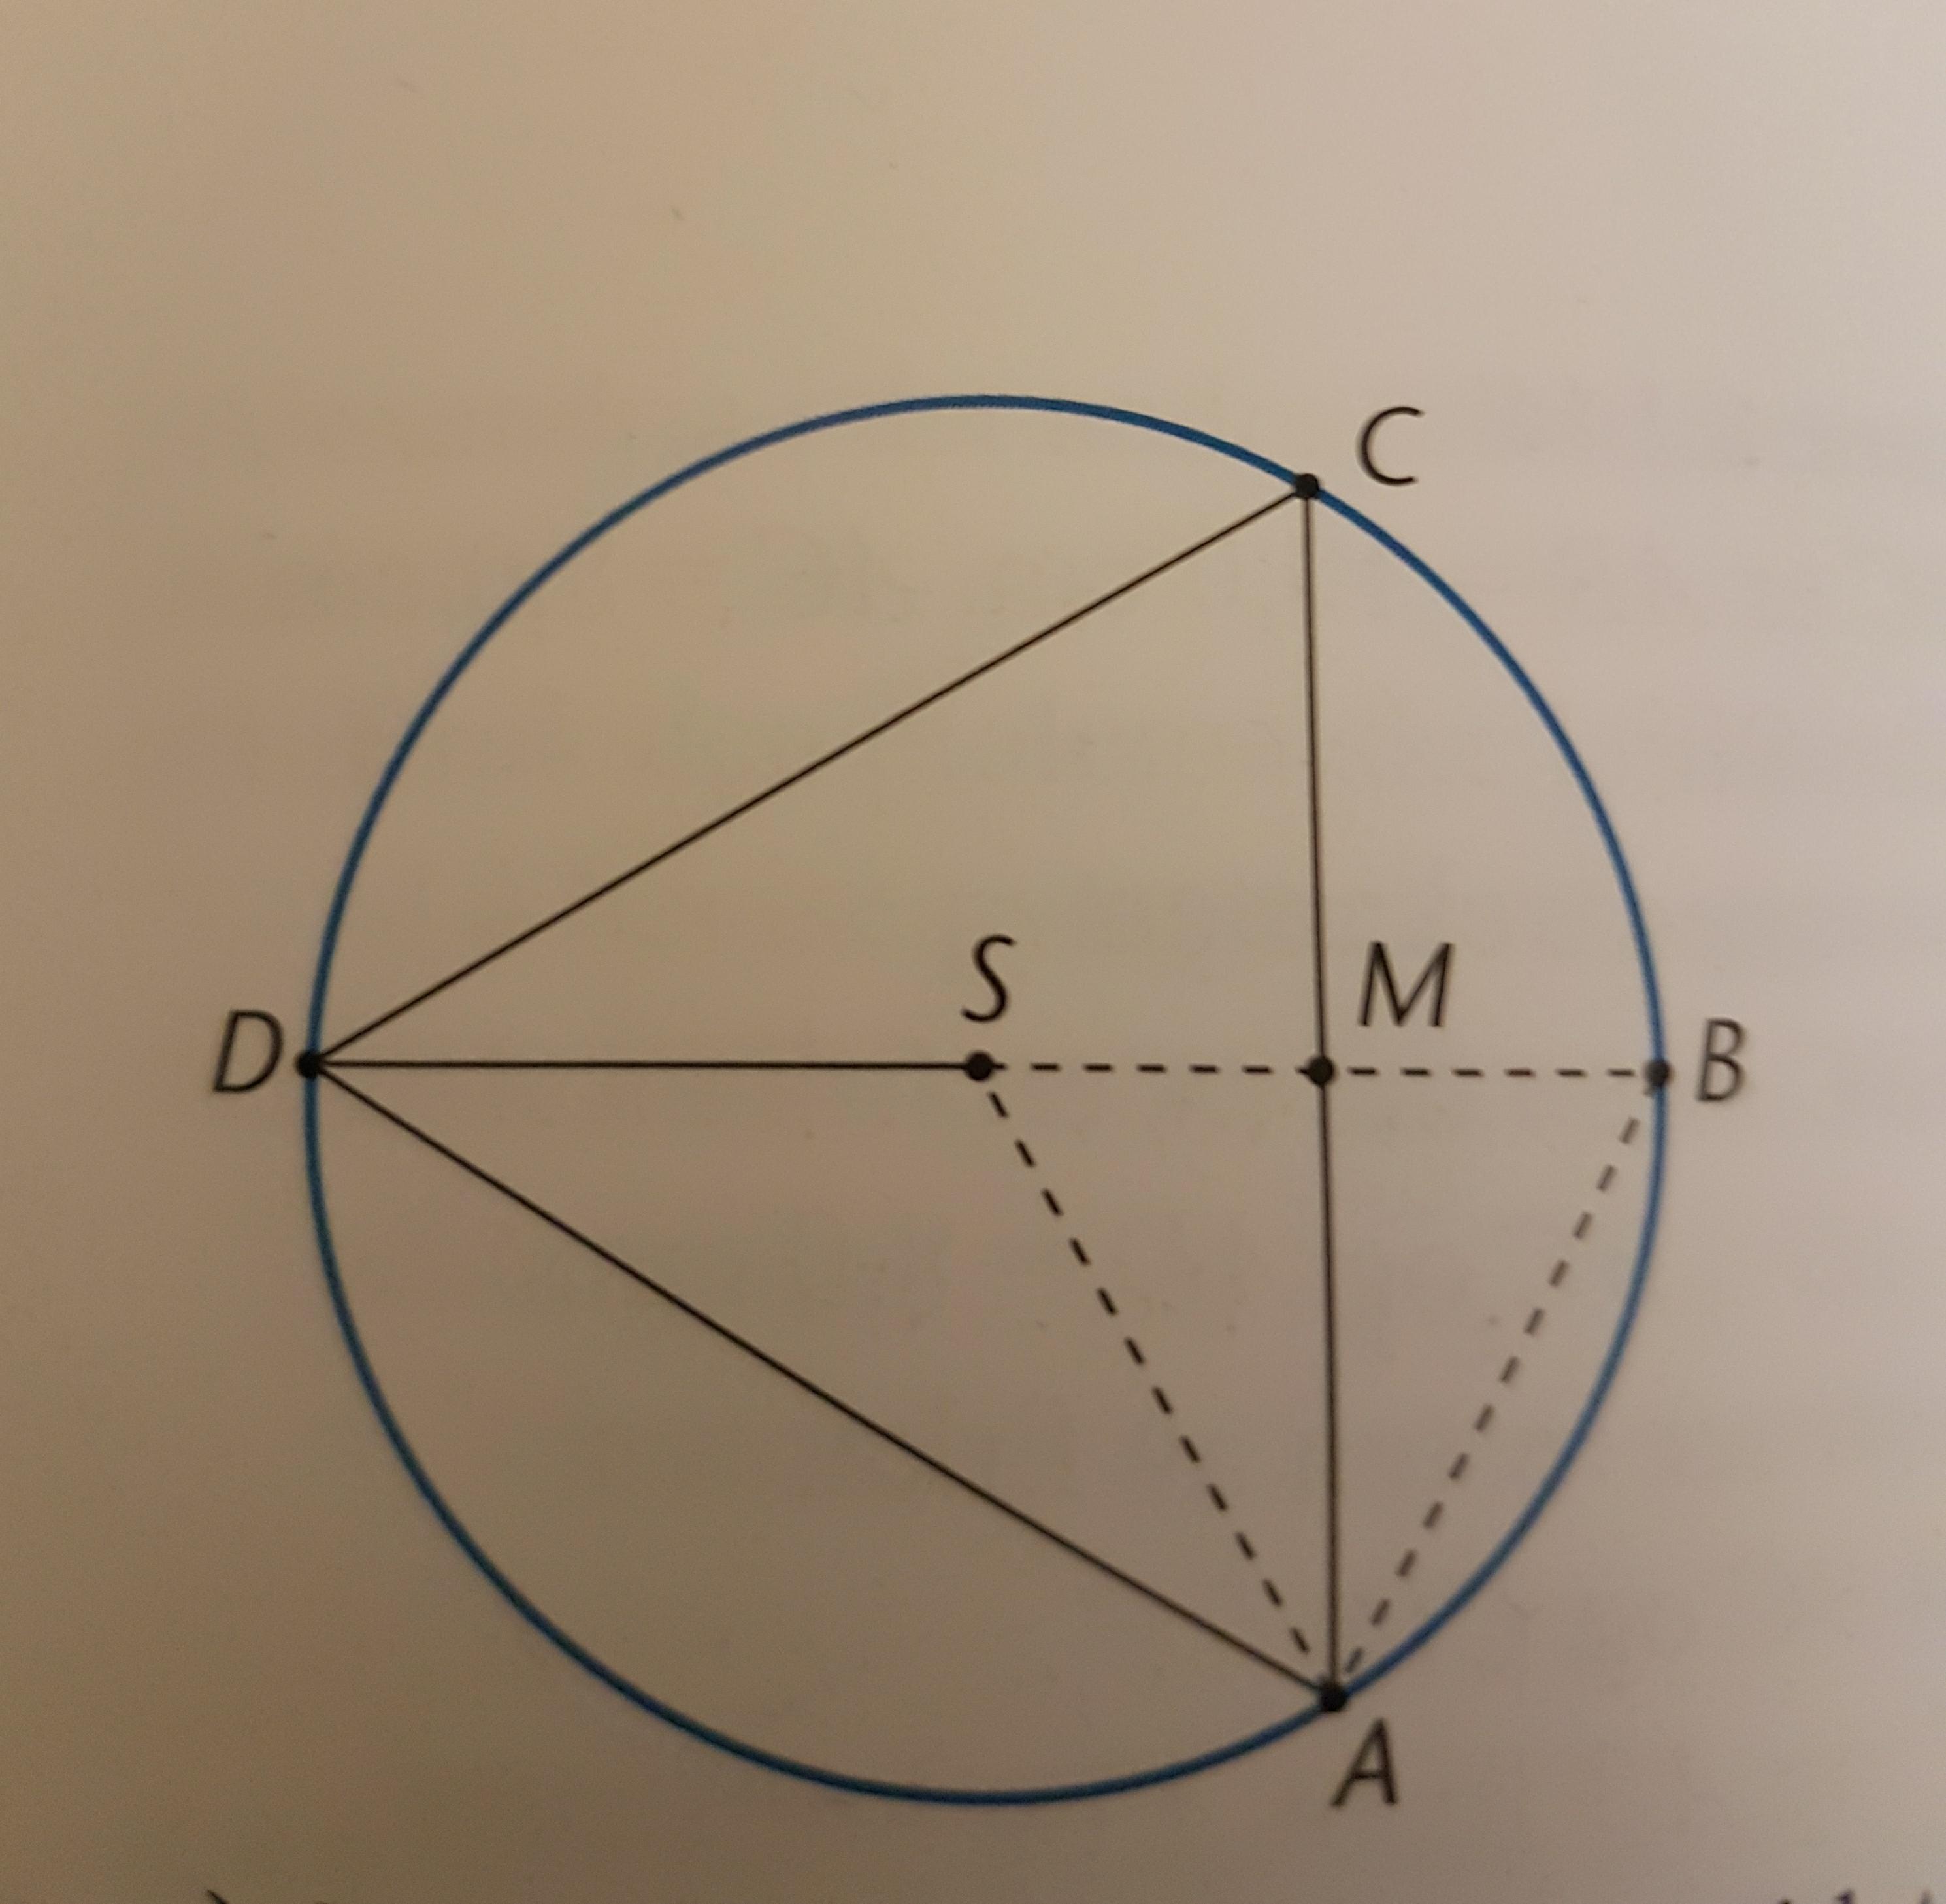 How To Prove That Acd Is An Equilateral Triangle Socratic